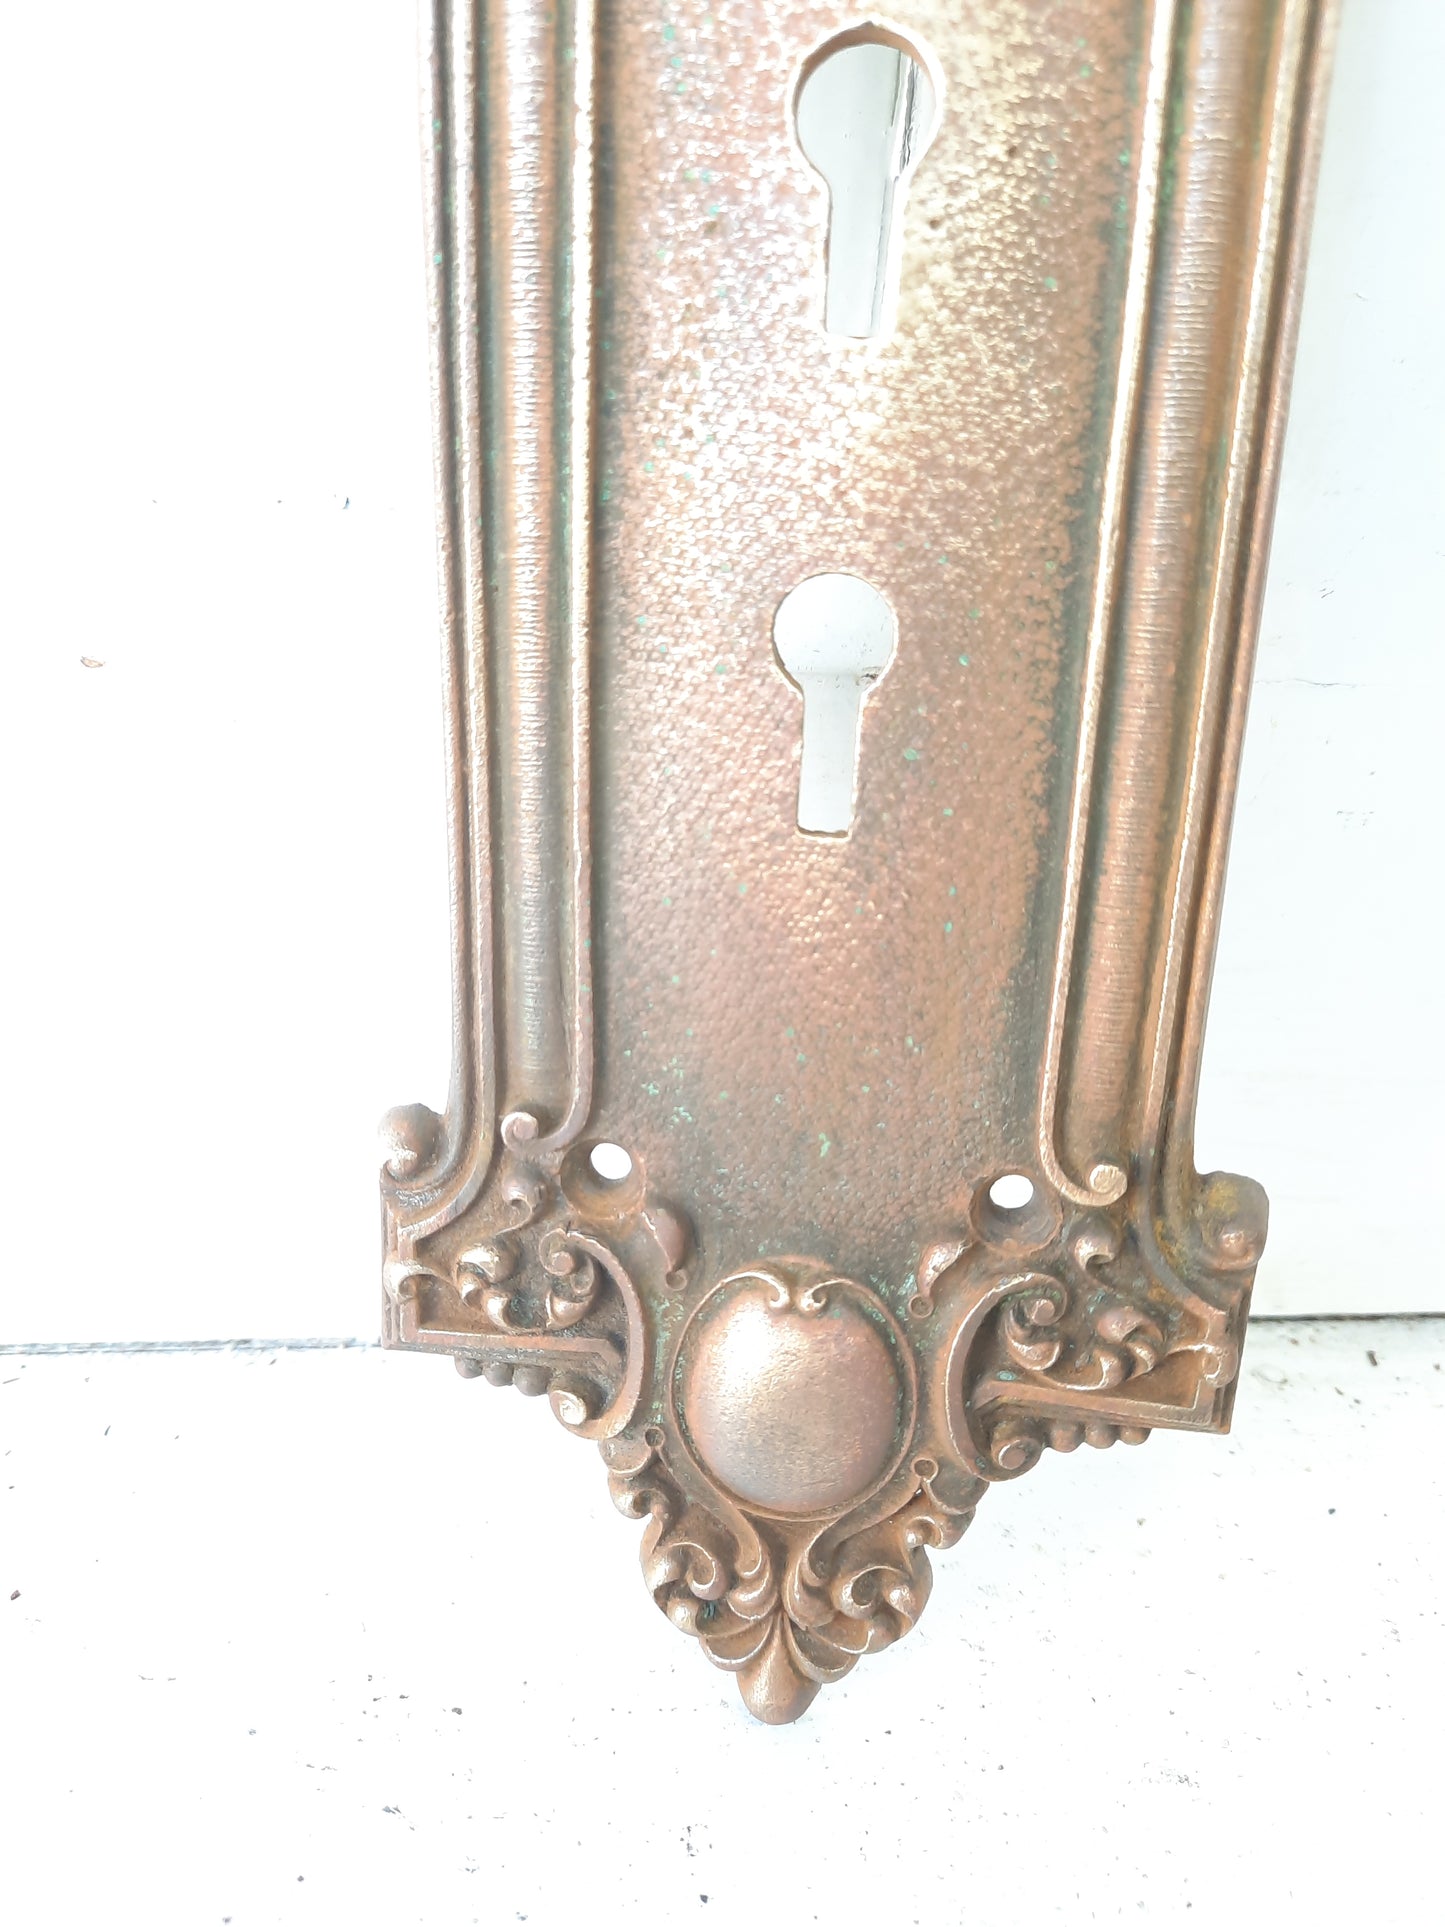 Large Bronze and Iron Reole Entry Plate with Double Keyhole, Front Door Doorknob Backplate Double Lock 101005